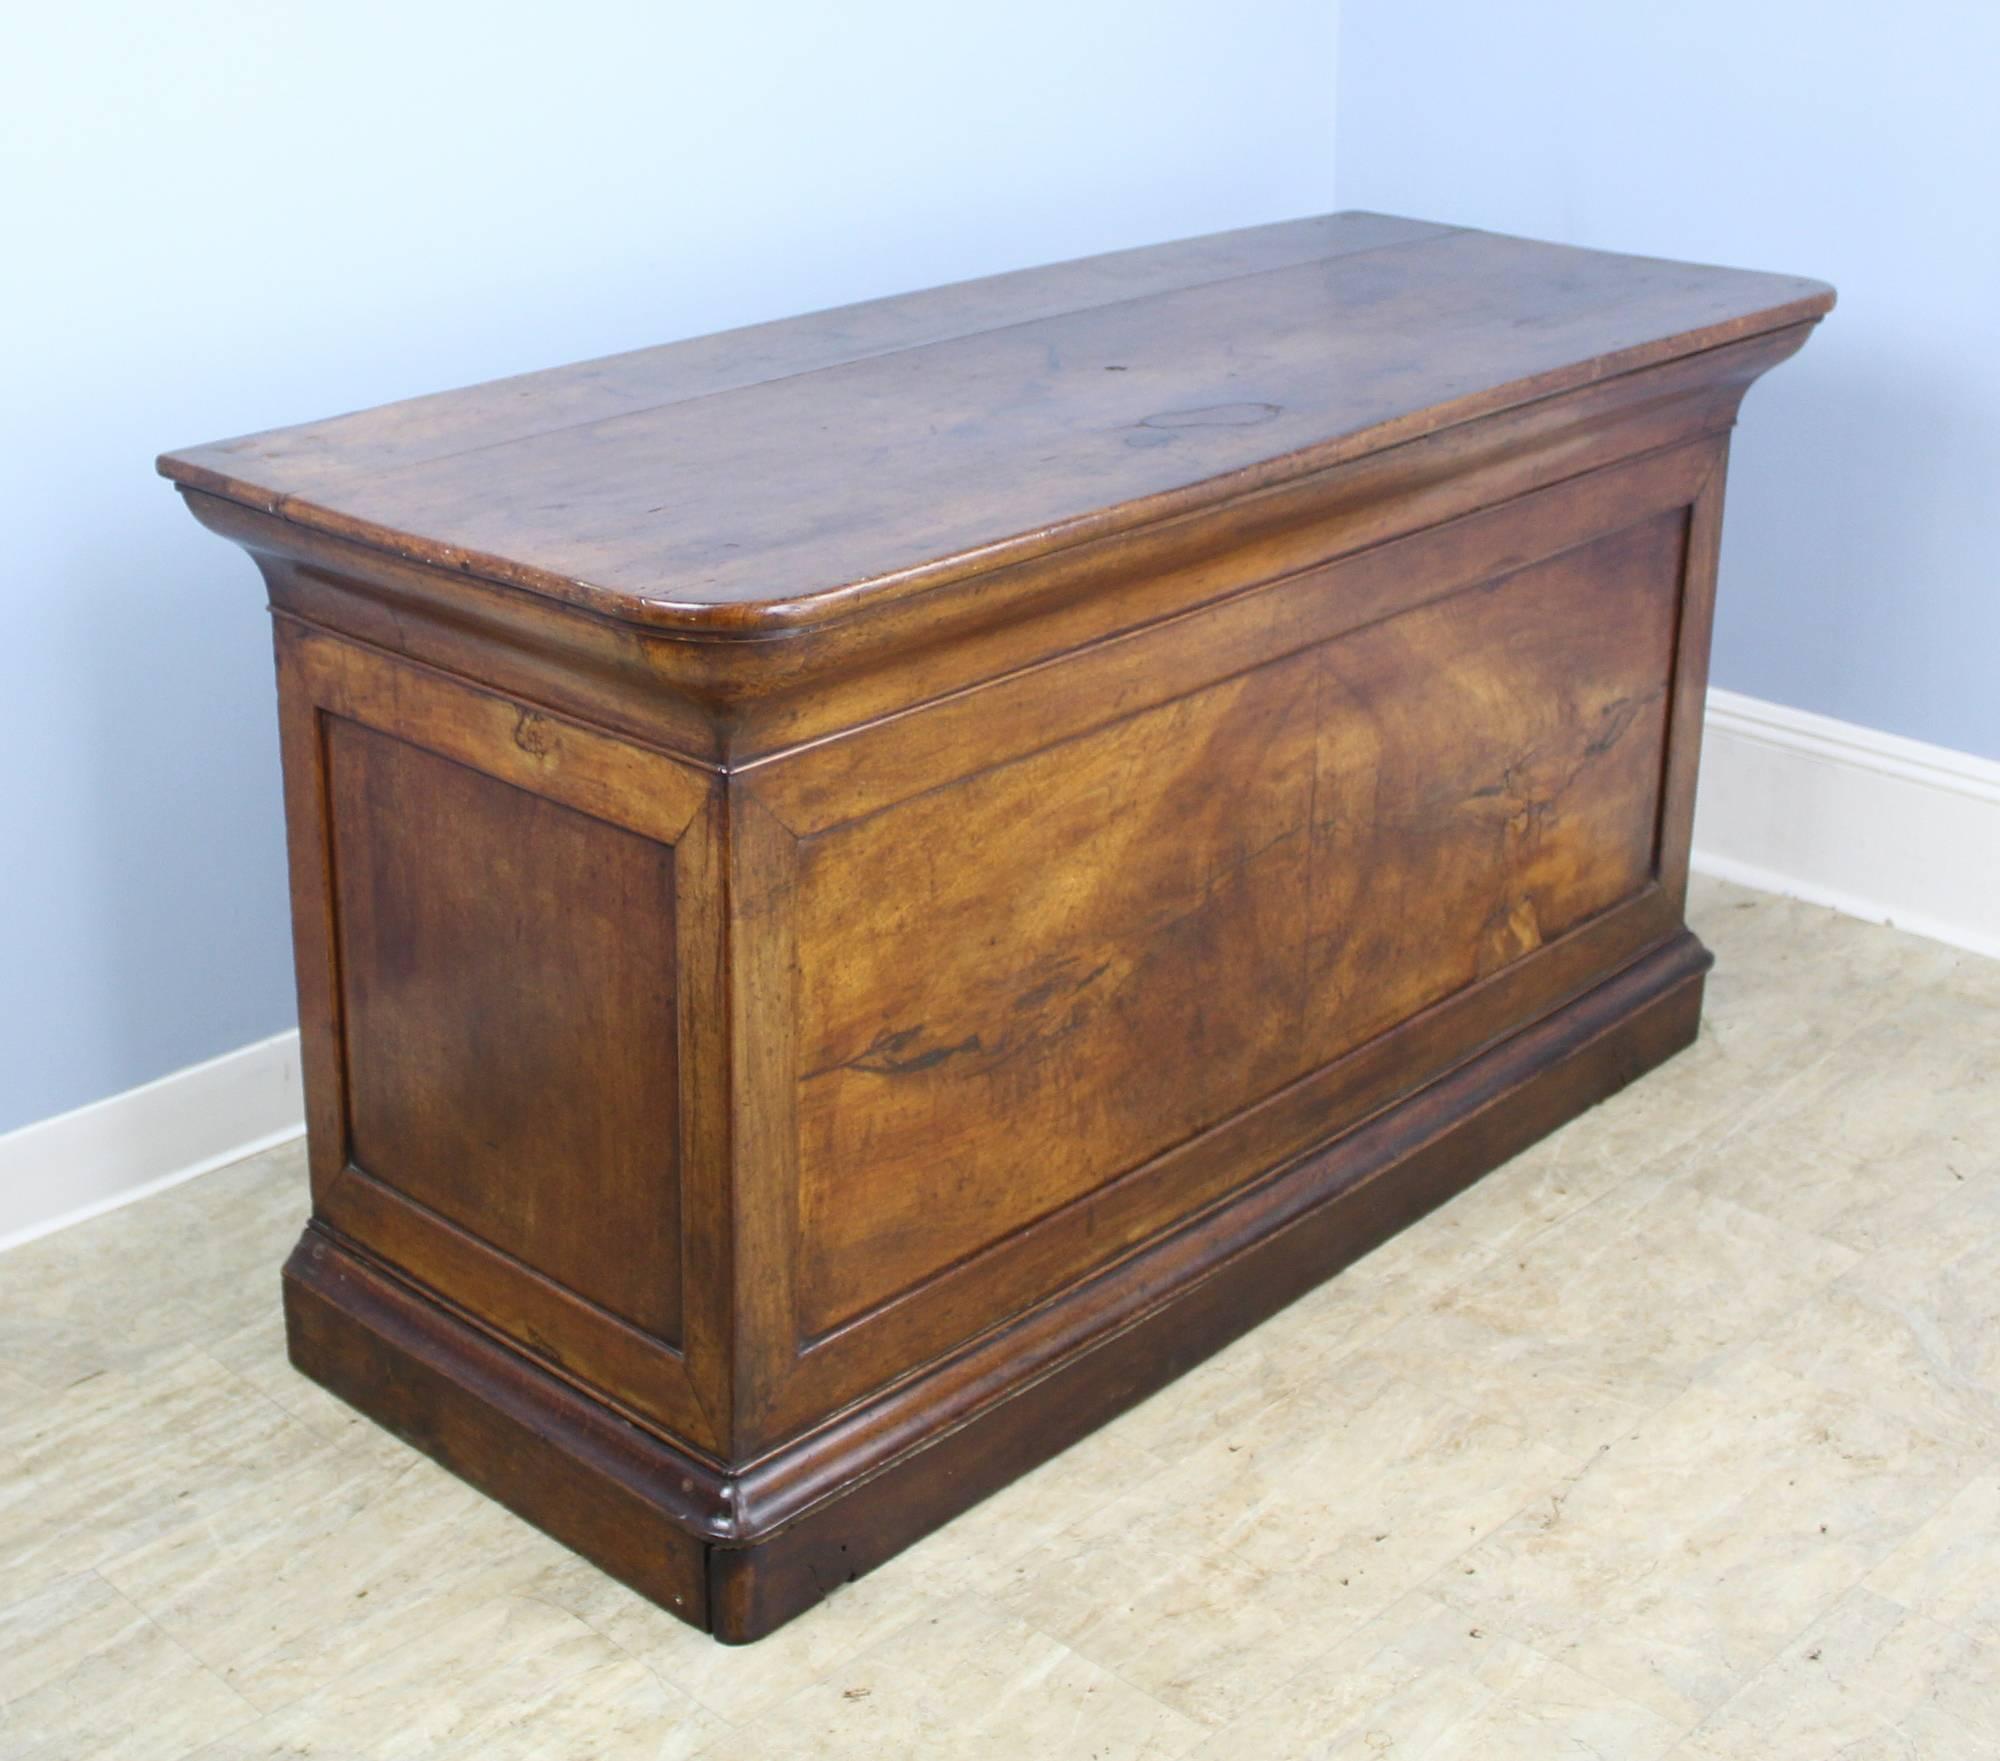 A fantastic desk created from a French commercial counter. French sensibility on the front - Louis Philippe style mouldings at top and bottom with a gloriously grained walnut facade. Go around the other side and you have an oak desk with a decidedly